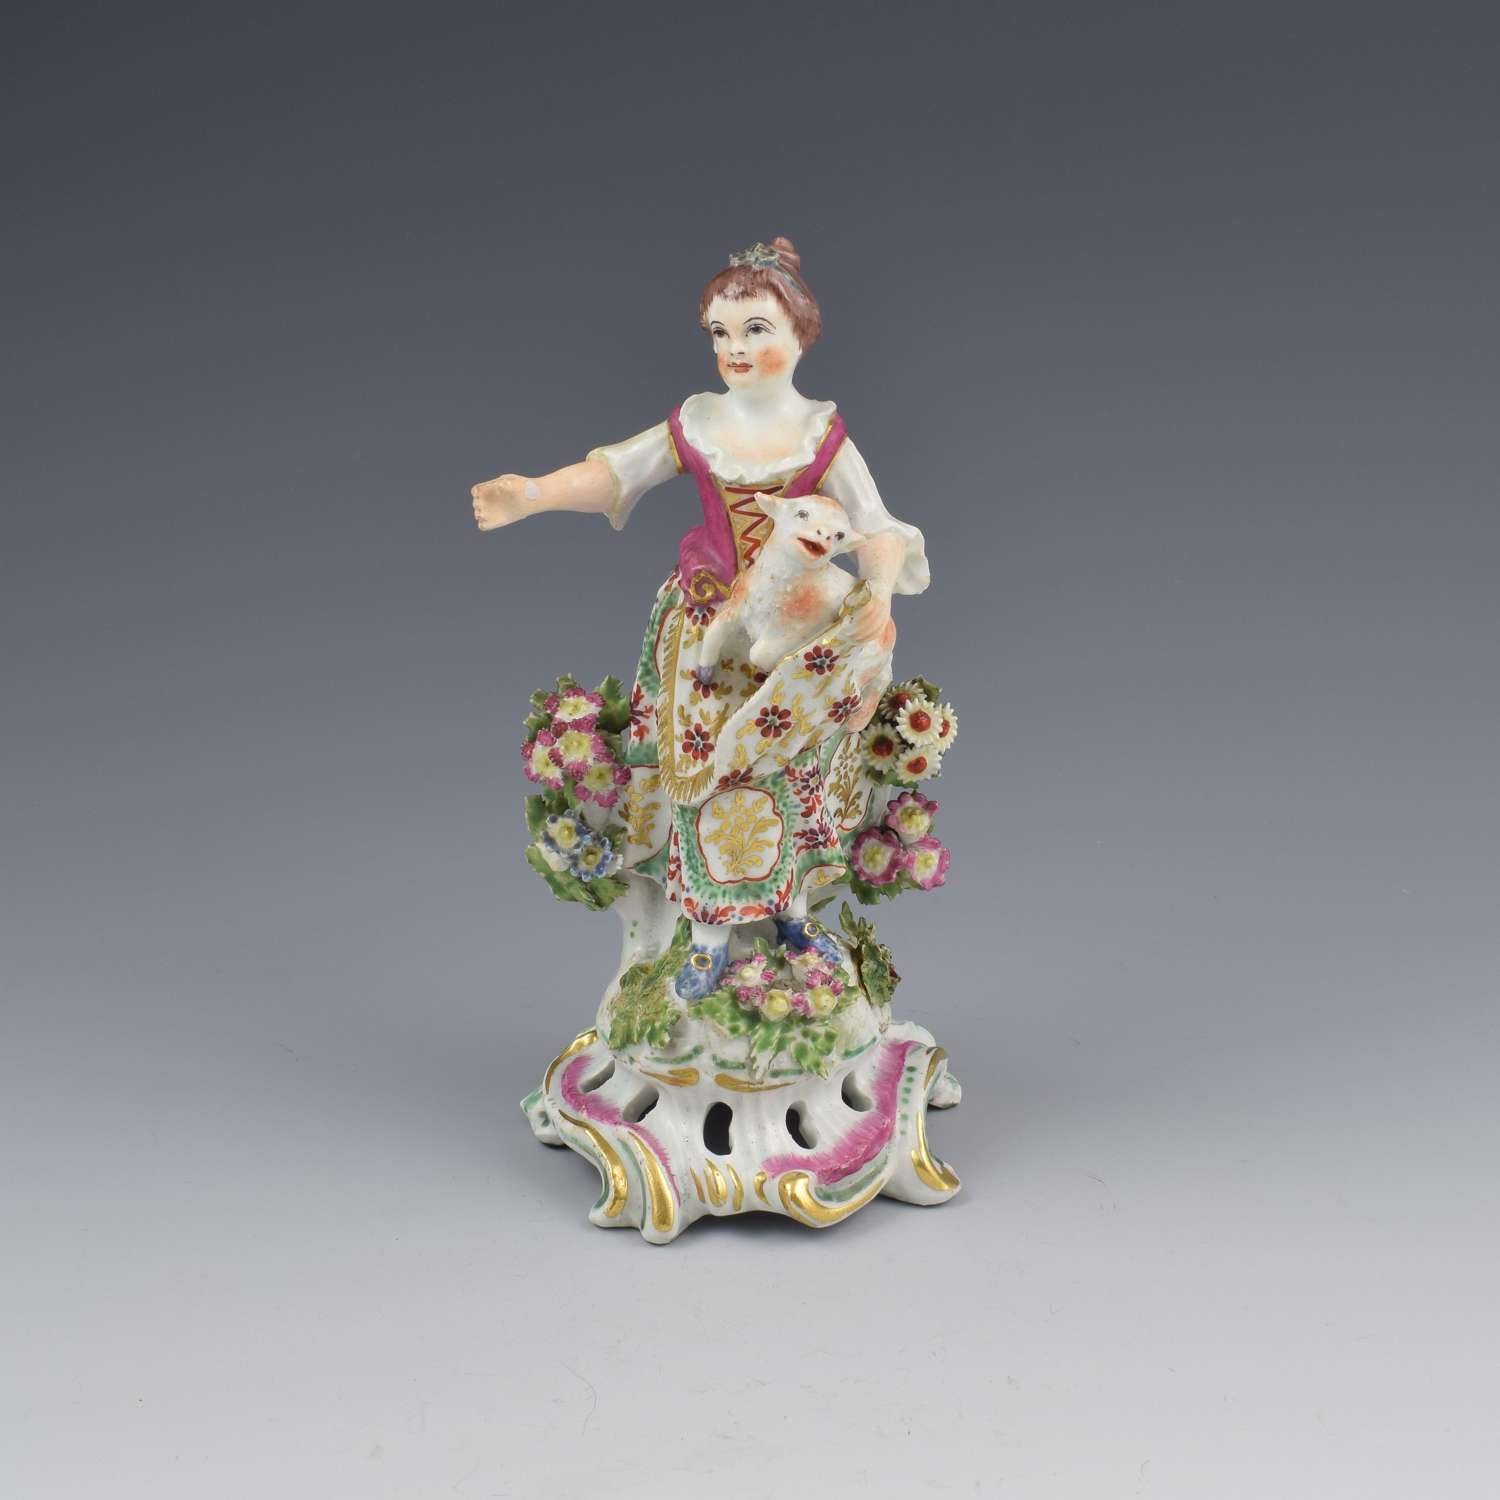 Bow Porcelain Figure Girl Shepherdess With Lamb In Apron c.1762-1764